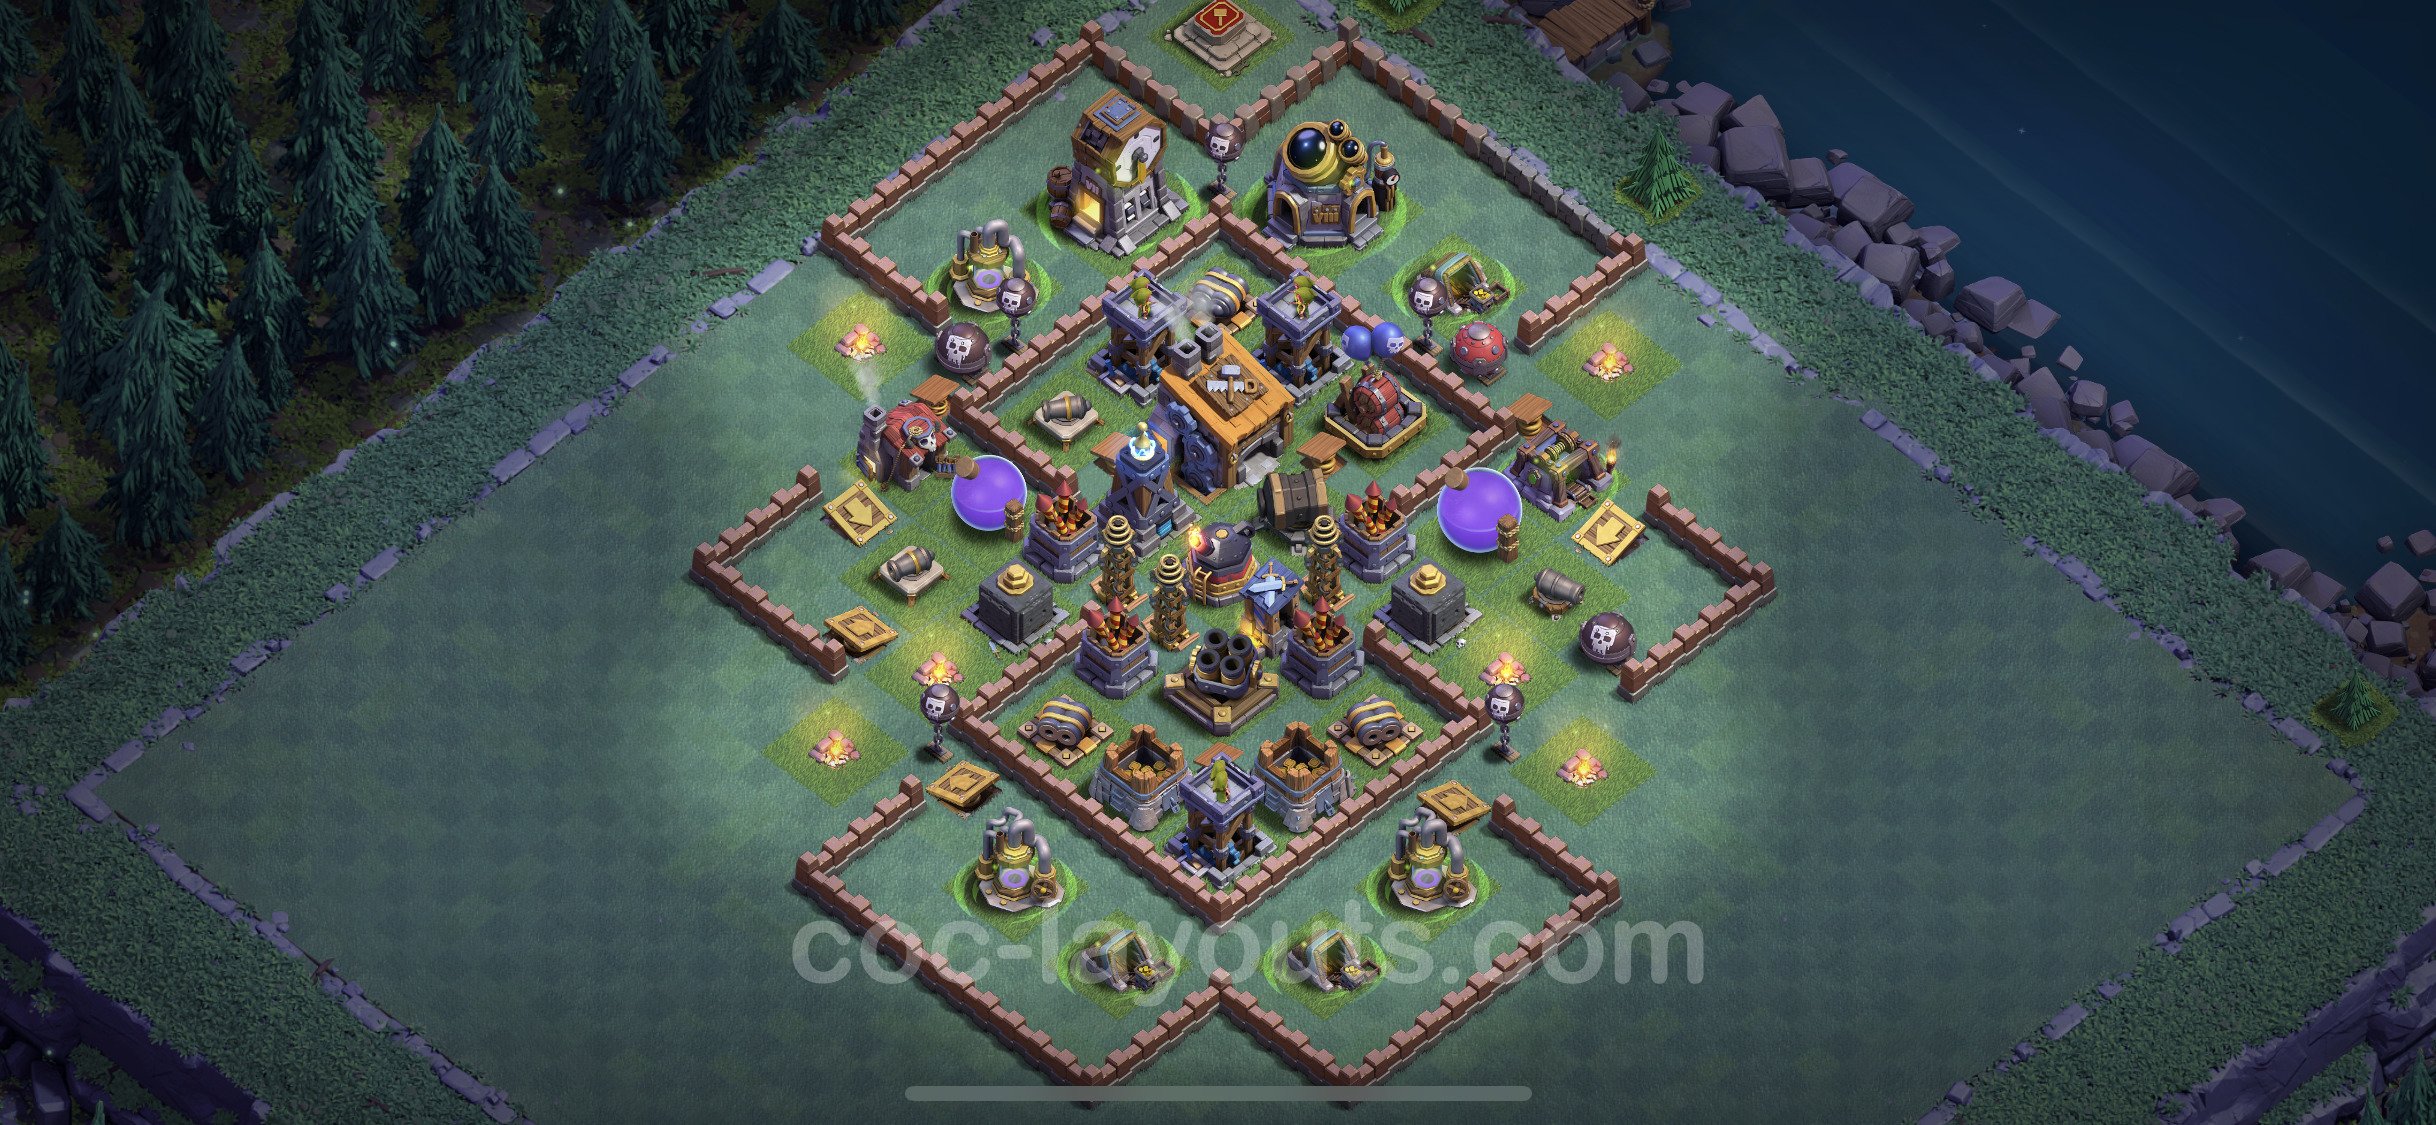 Clash of clans bh8 base